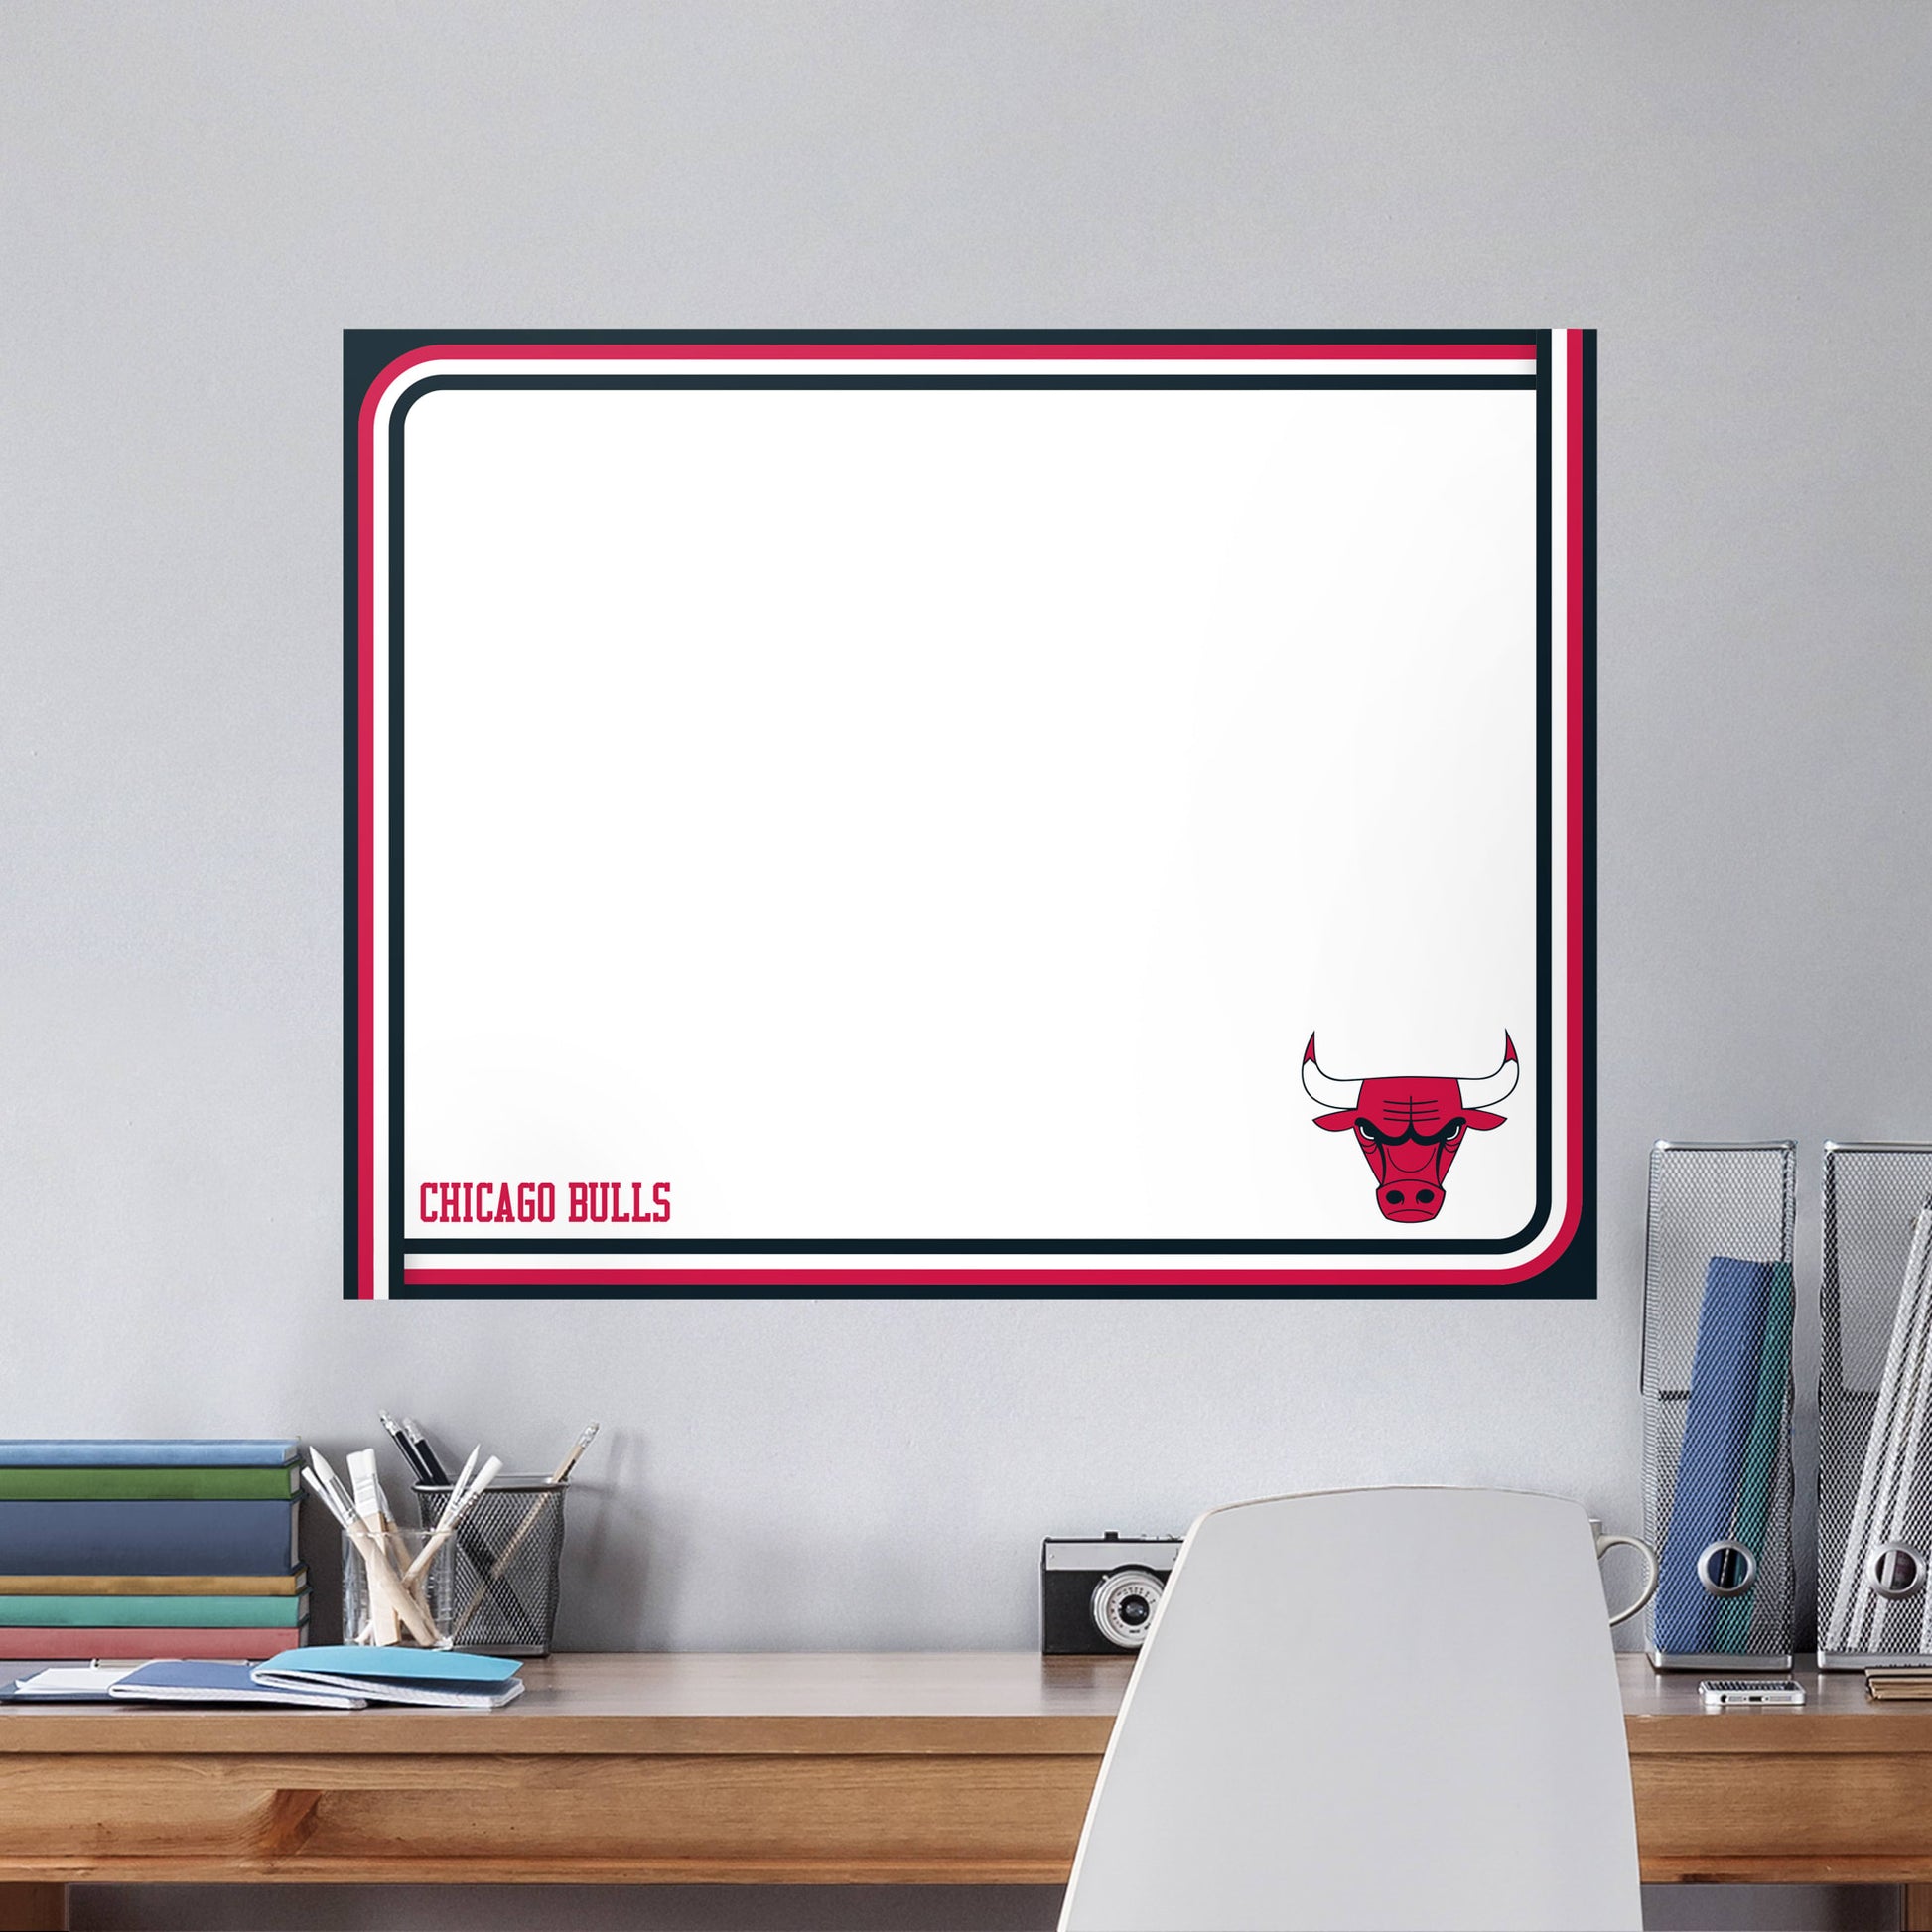 Whiteboard Decal, Dry Erase Wall Decal